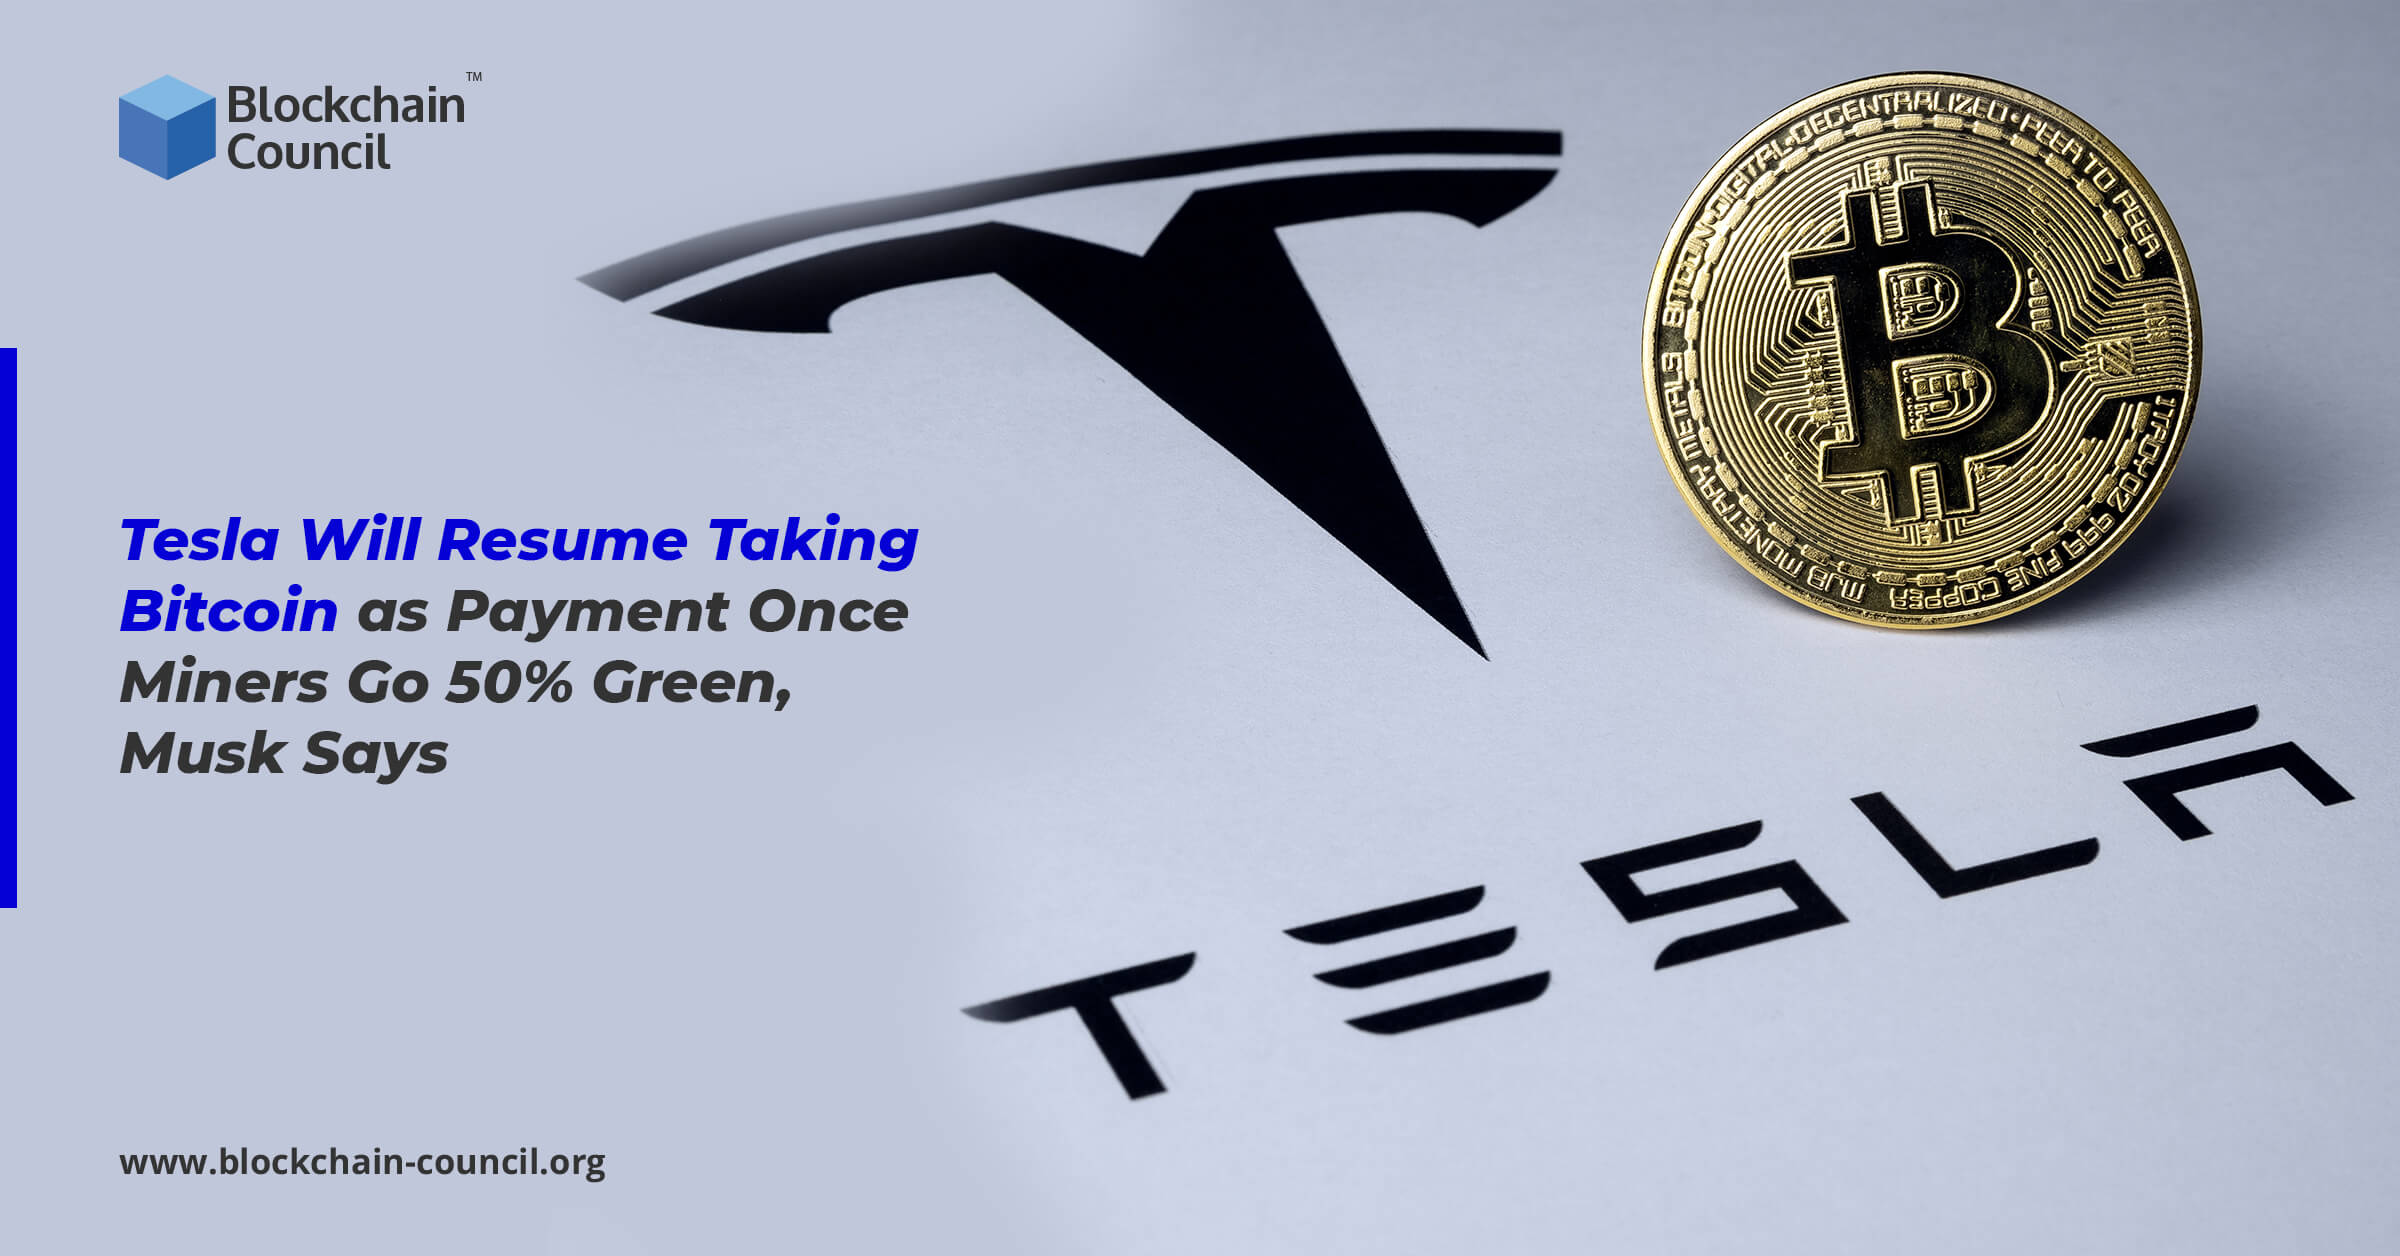 Elon Musk announced, Tesla is reconsidering Bitcoin as Payment after Miners Turn 50 % Green.